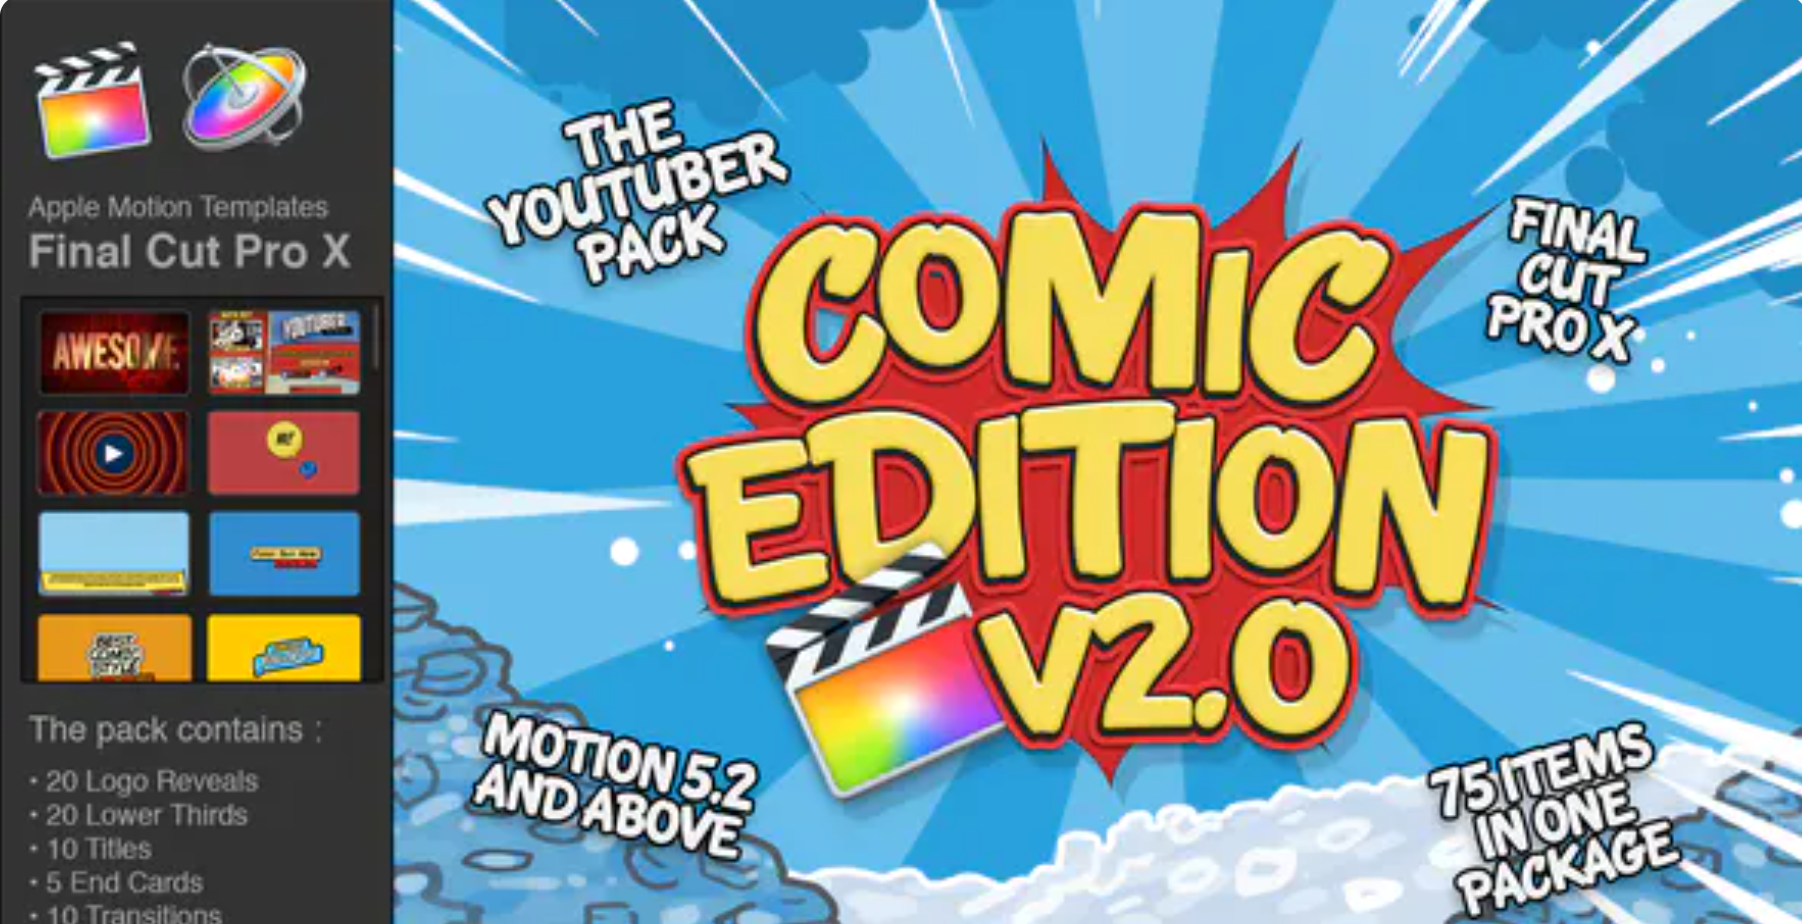 The YouTuber Pack - Comic Edition V2.0 - Final Cut Pro X 7